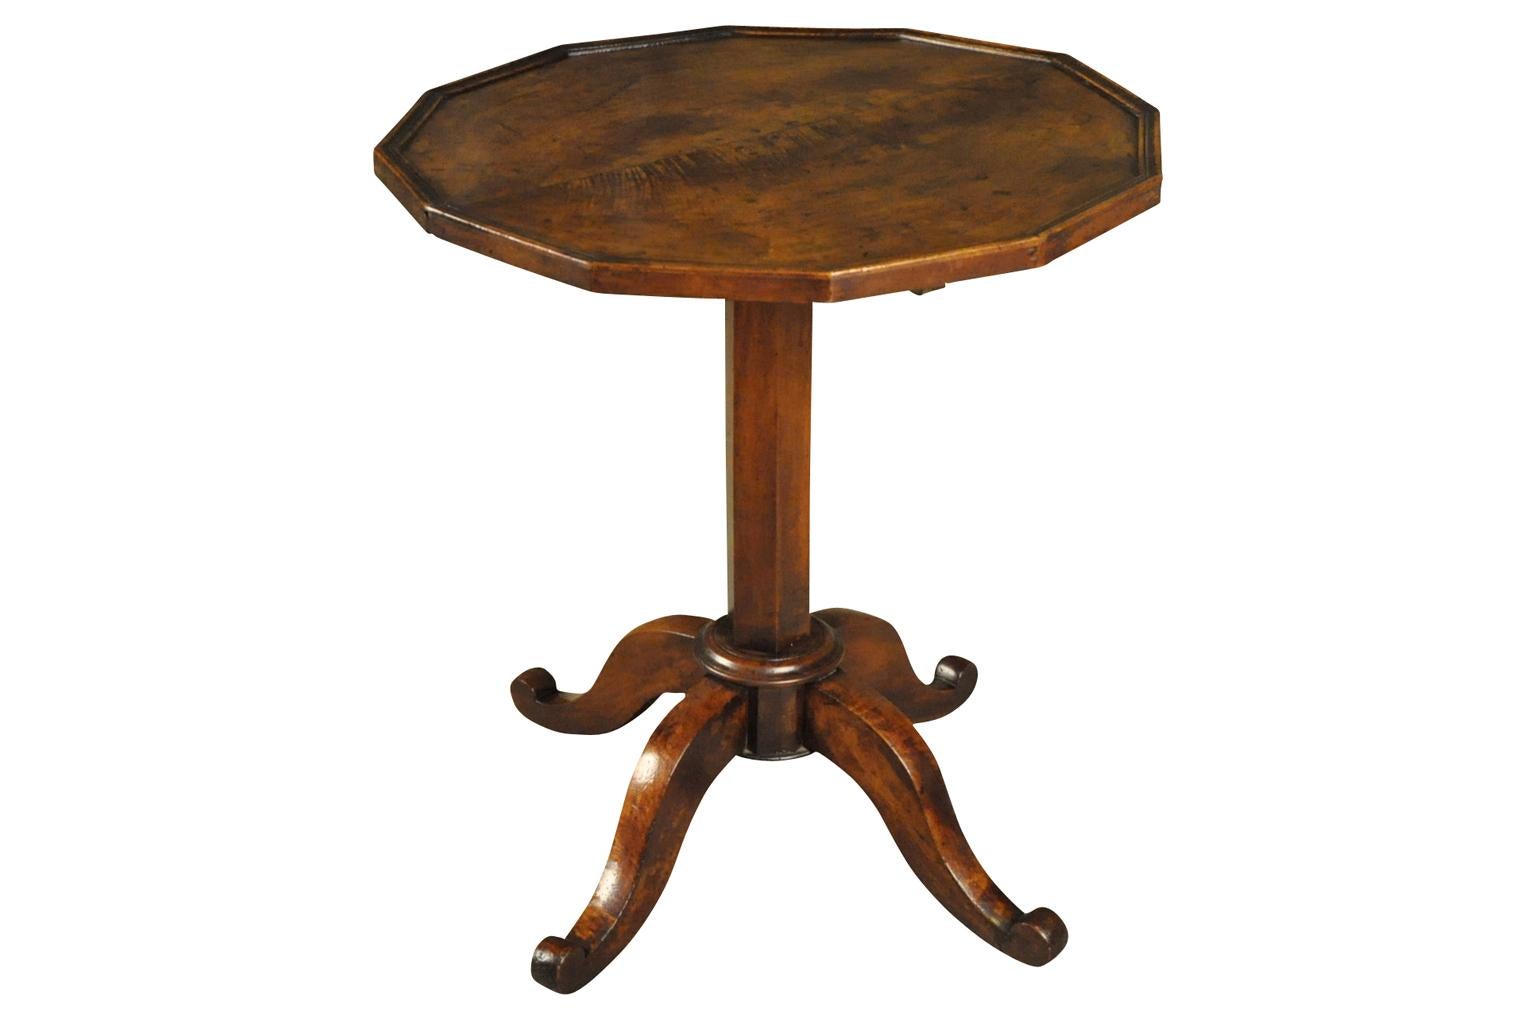 A very handsome later 19th century Gueridon - side table from the South of France. Wonderfully constructed in beautiful walnut. Lovely patina.